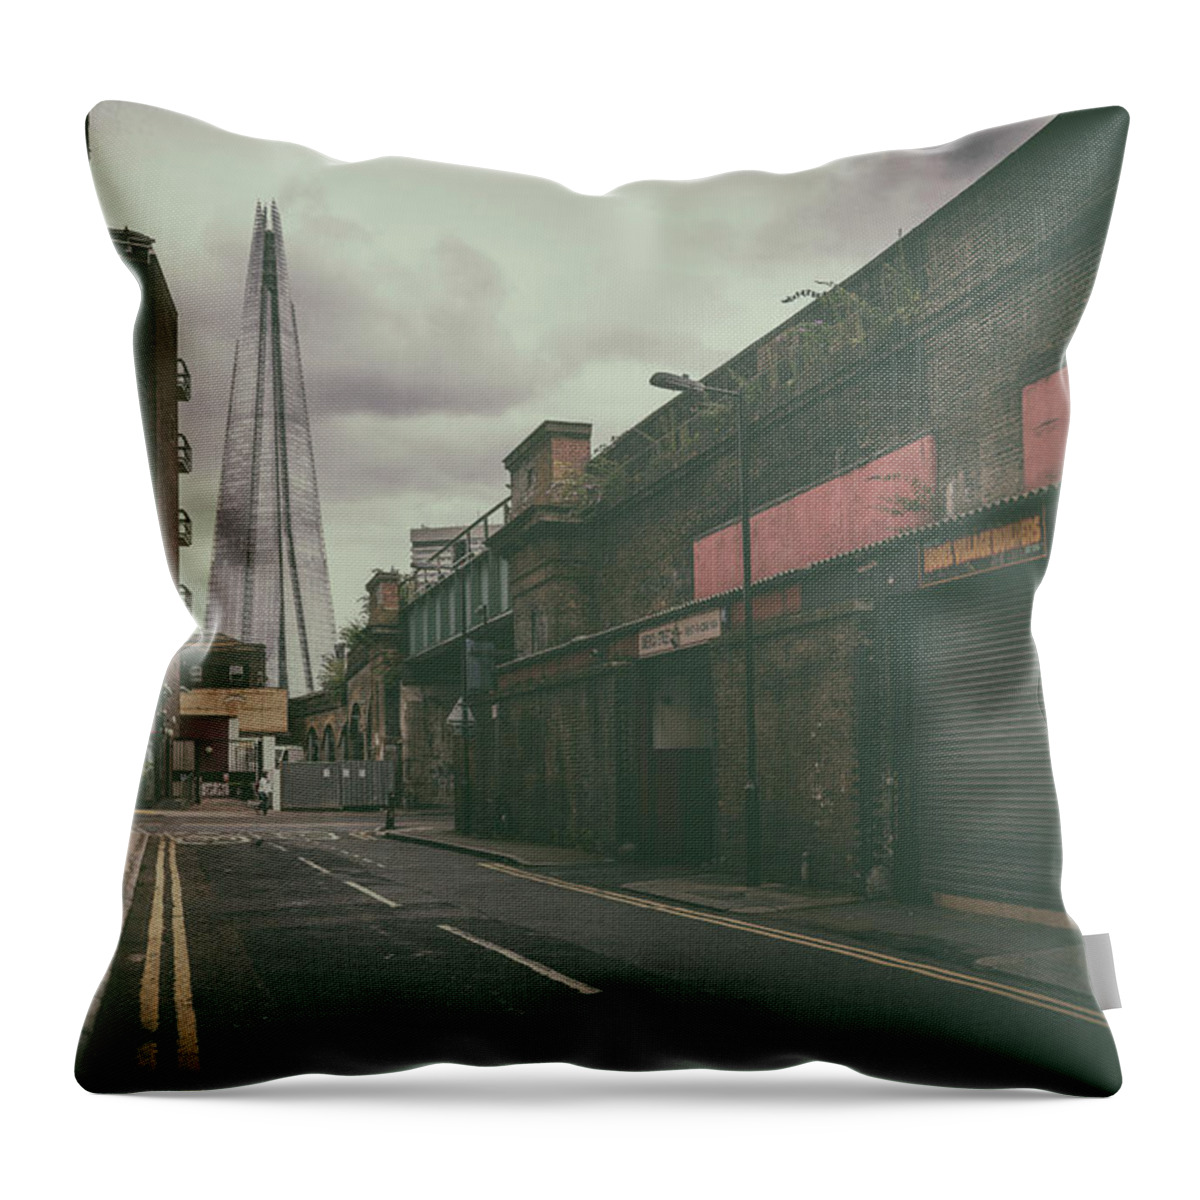 America Street Throw Pillow featuring the photograph Back-street Shard by James Billings